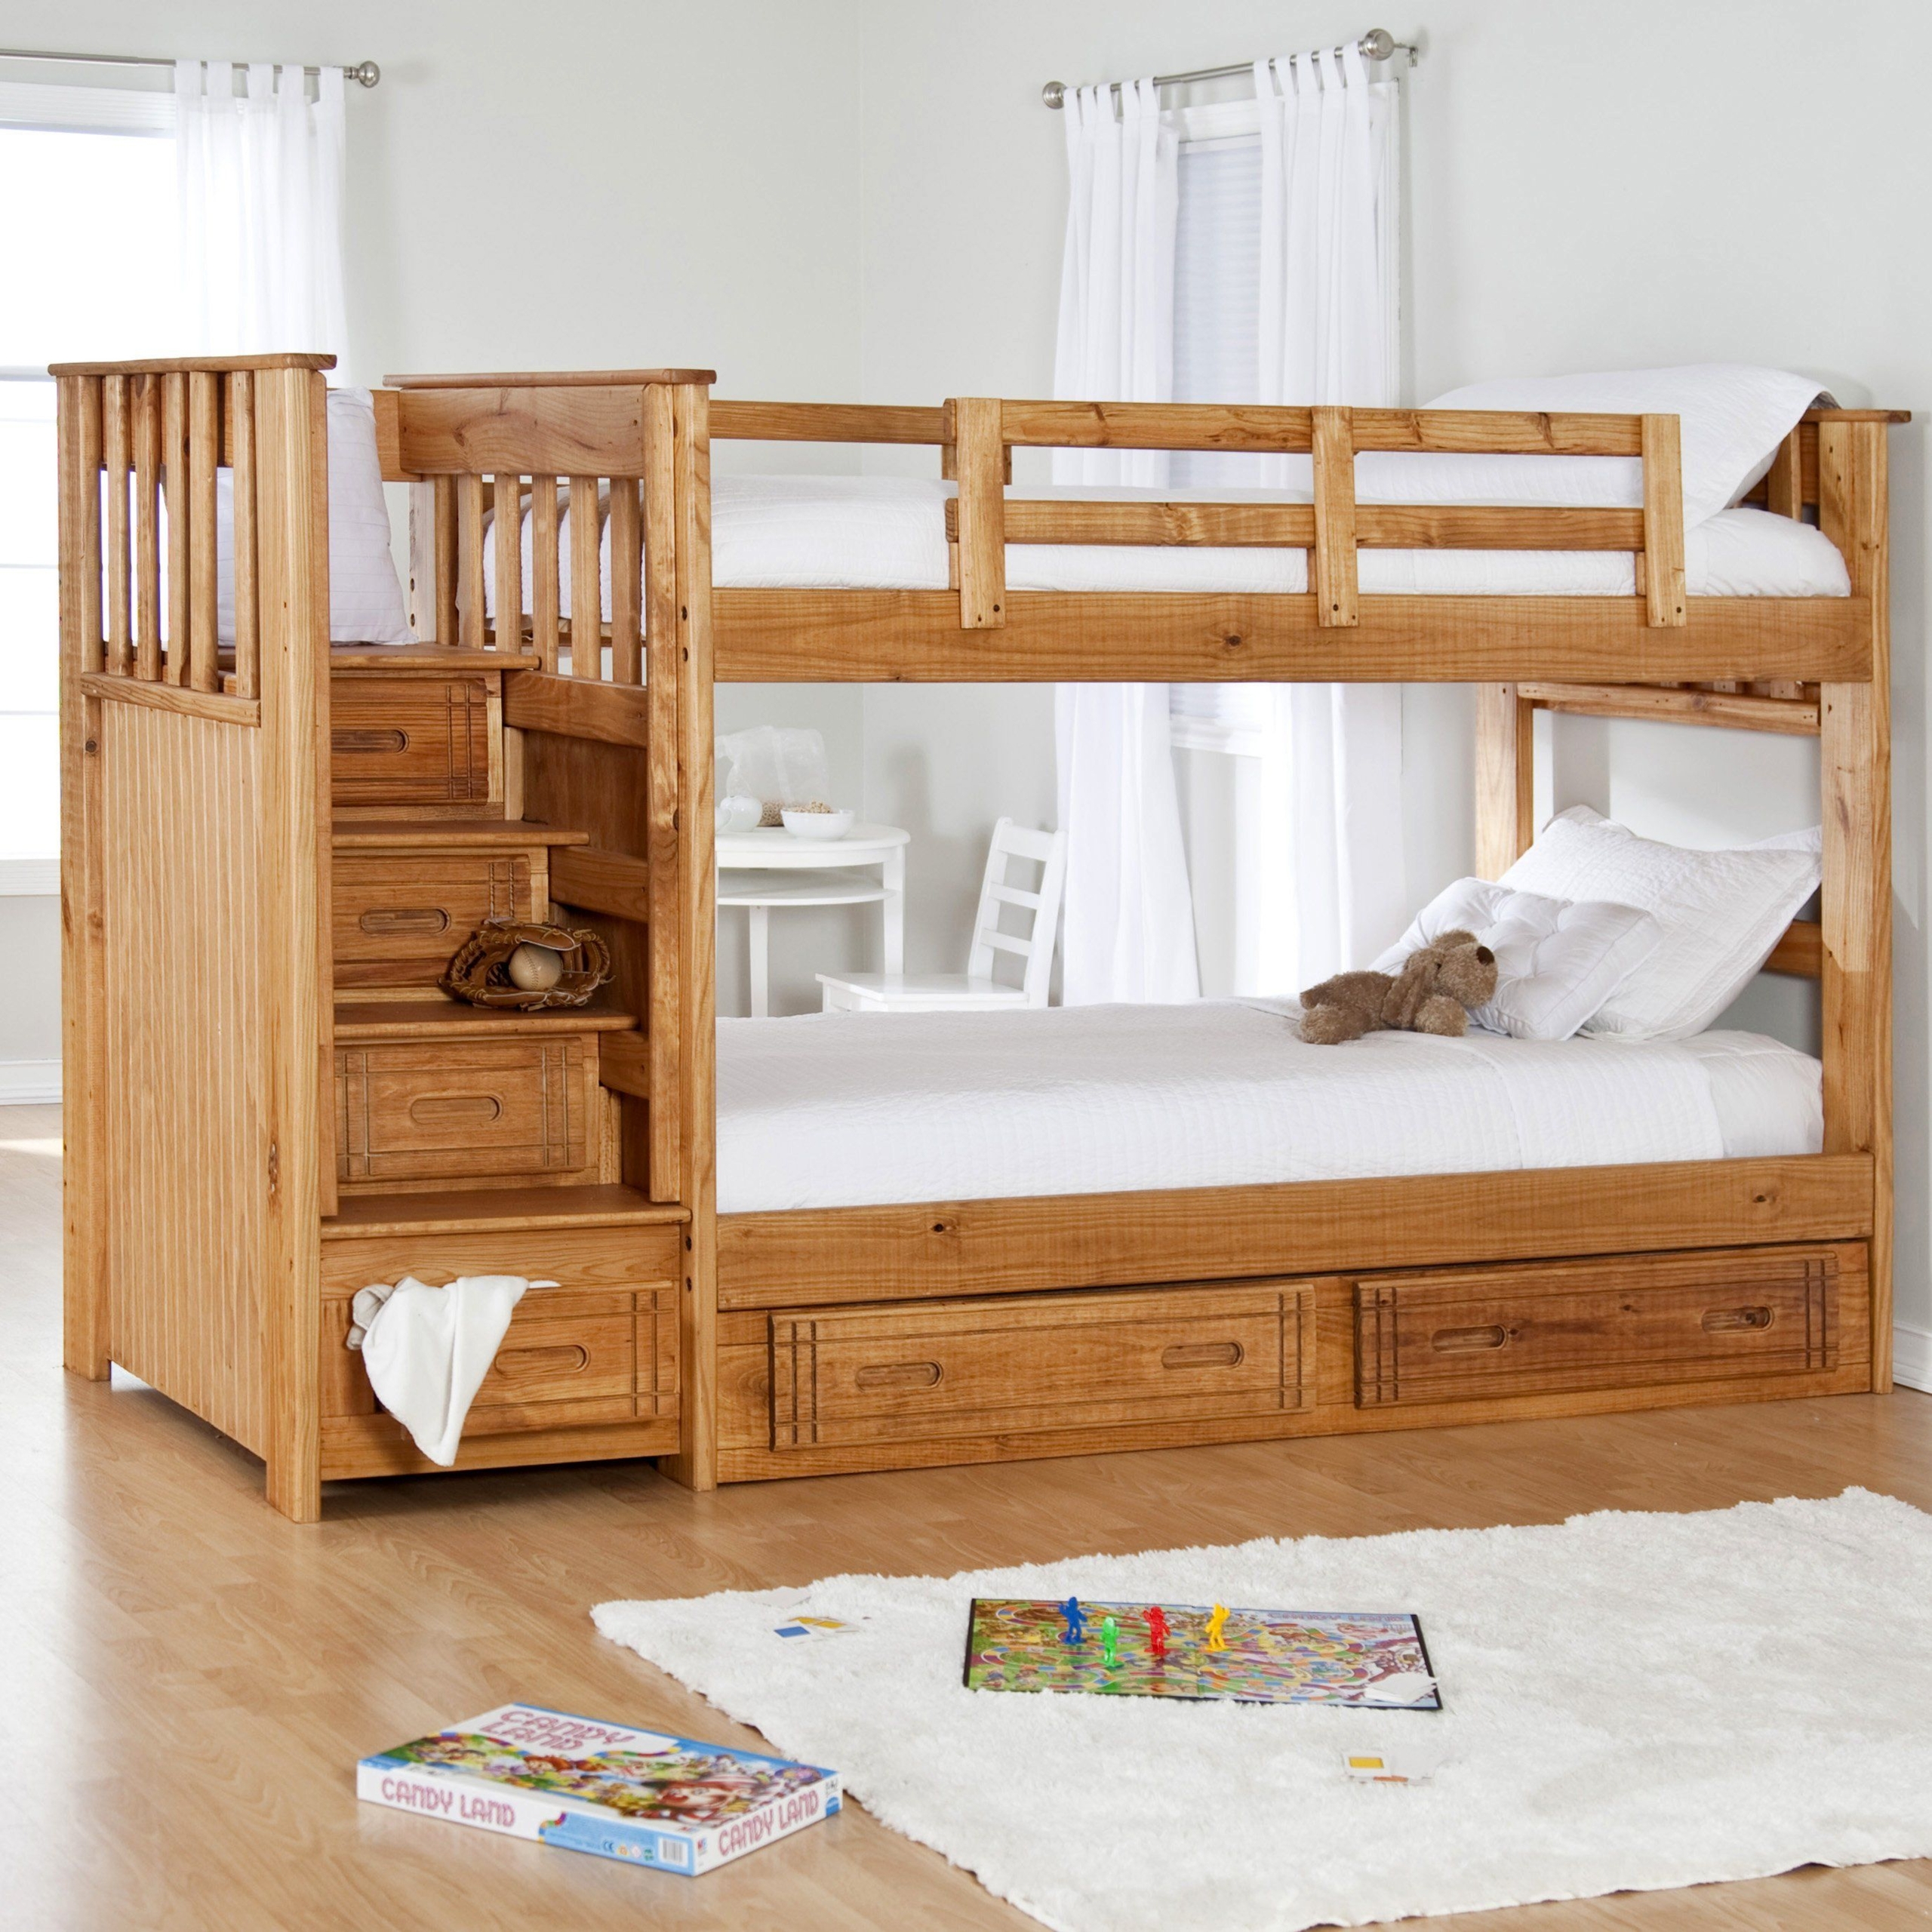 Twin bunk beds for two kids in a small room